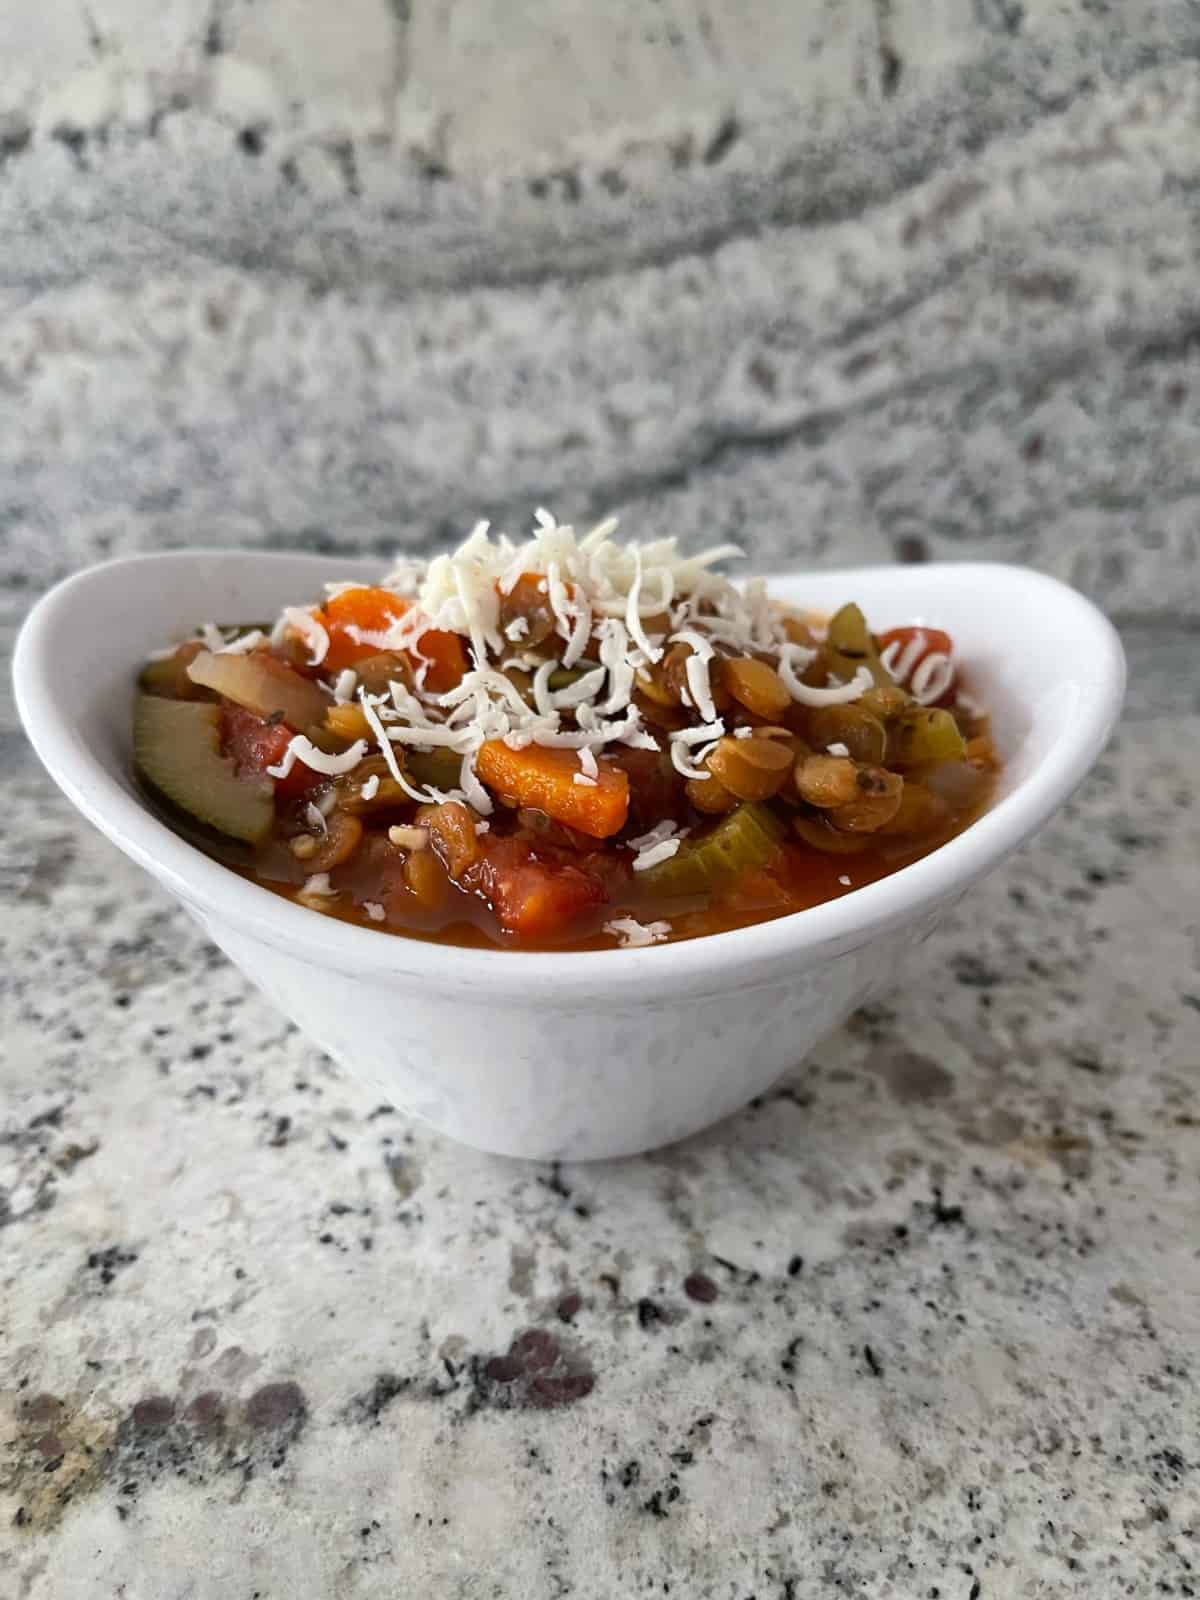 Instant Pot Lentil Minestrone topped with grated Parmesan cheese in white bowl on granite.